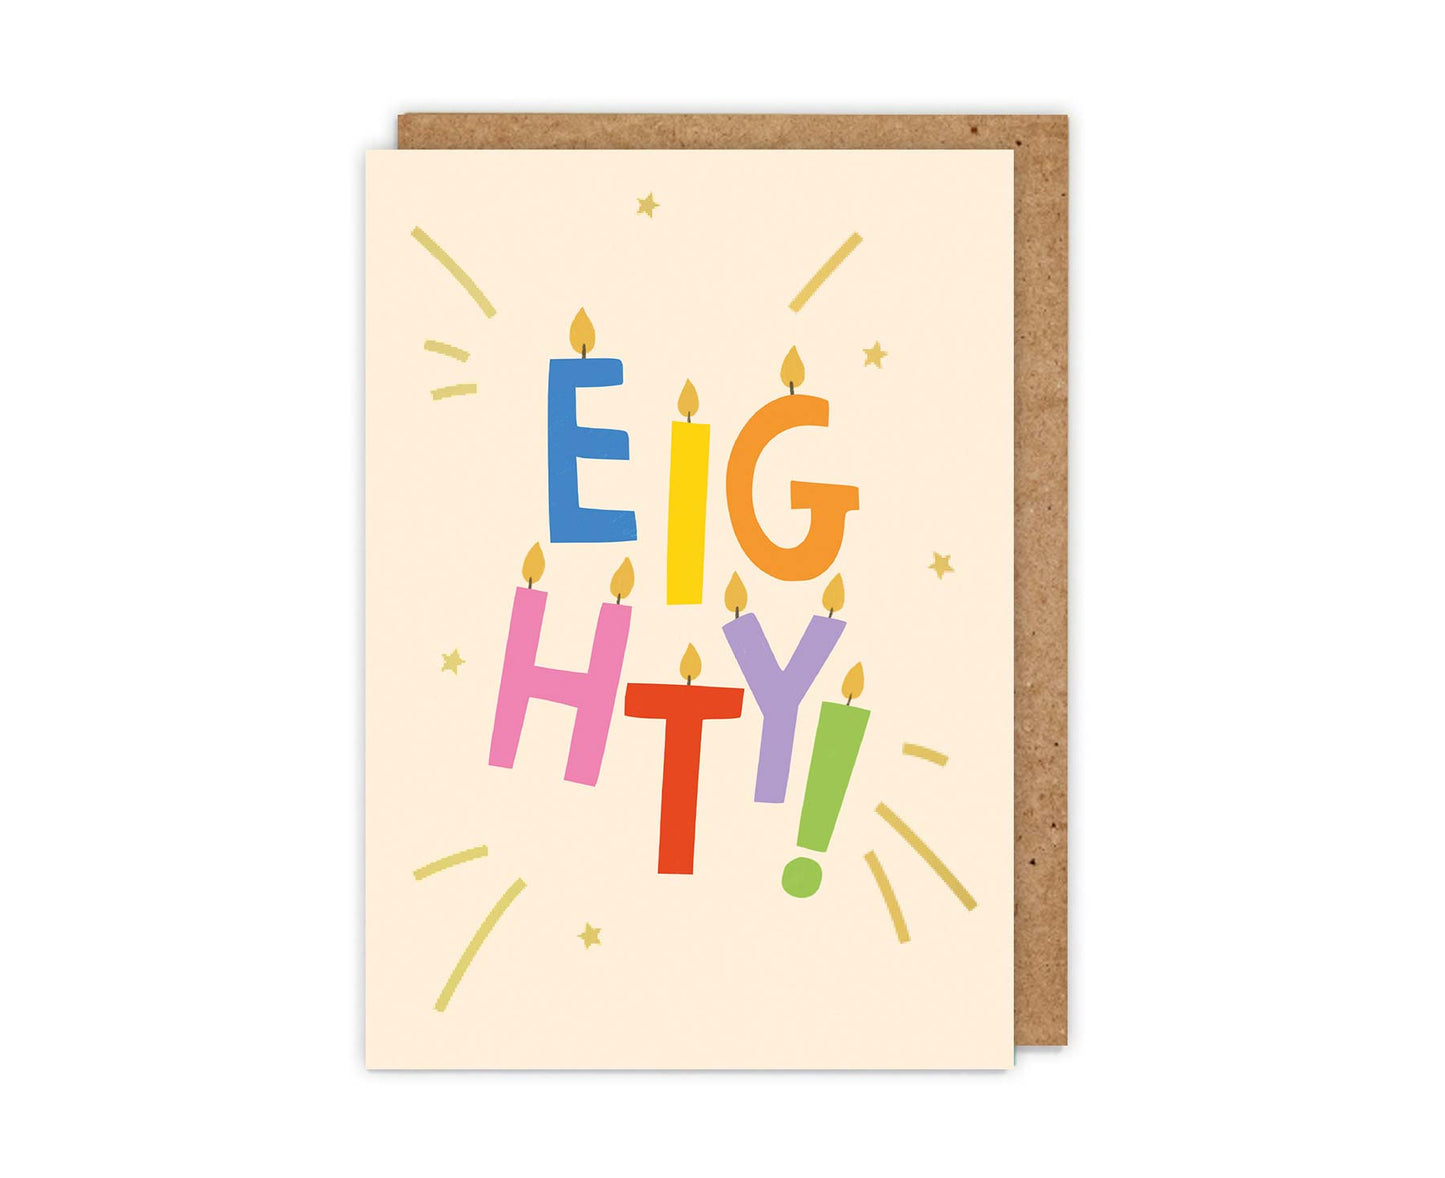 Gold Foiled Eighty! Letter Candles Birthday Card